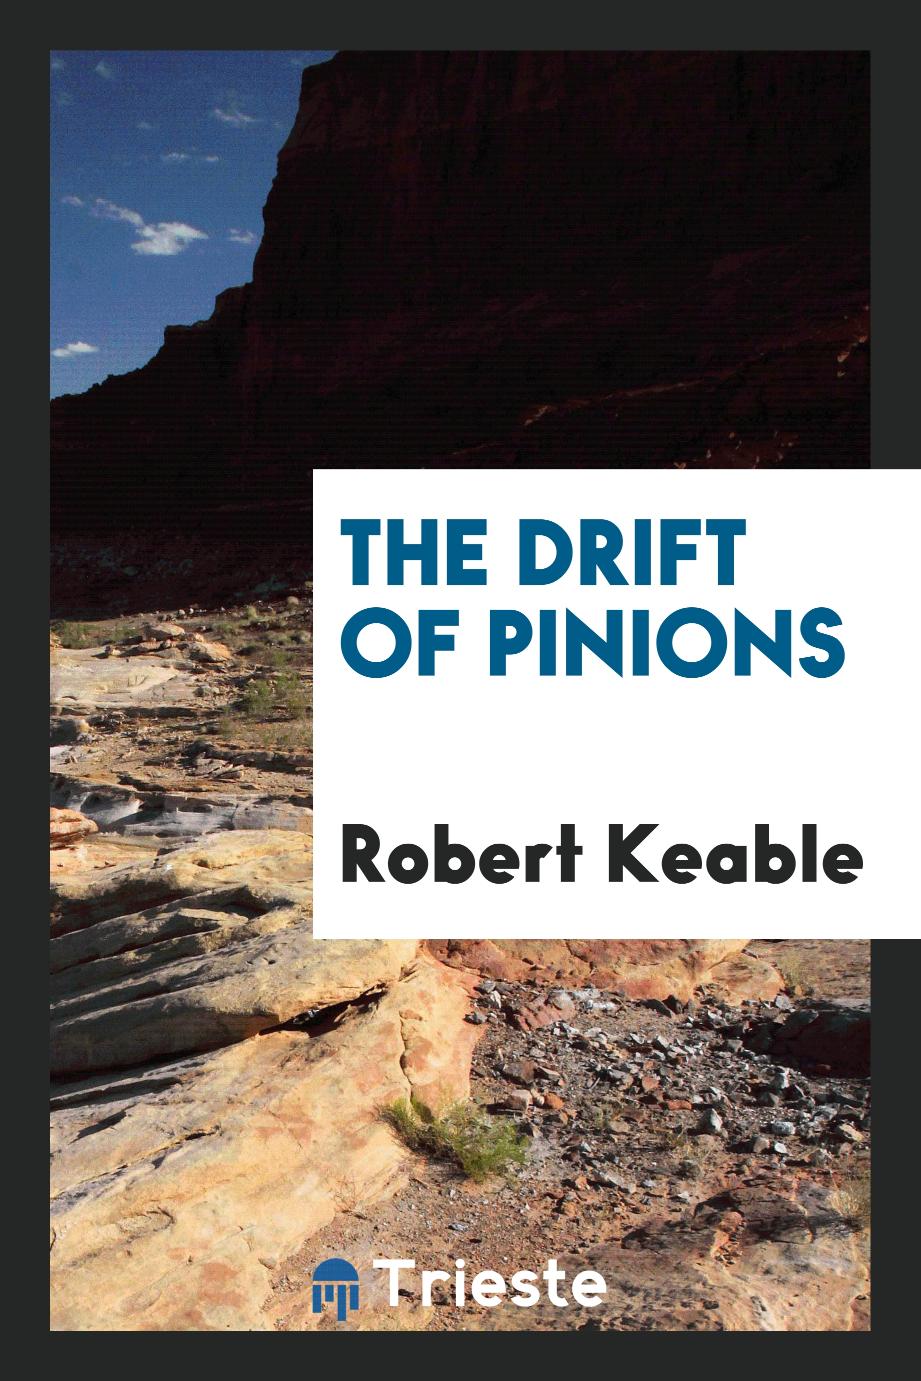 The drift of pinions